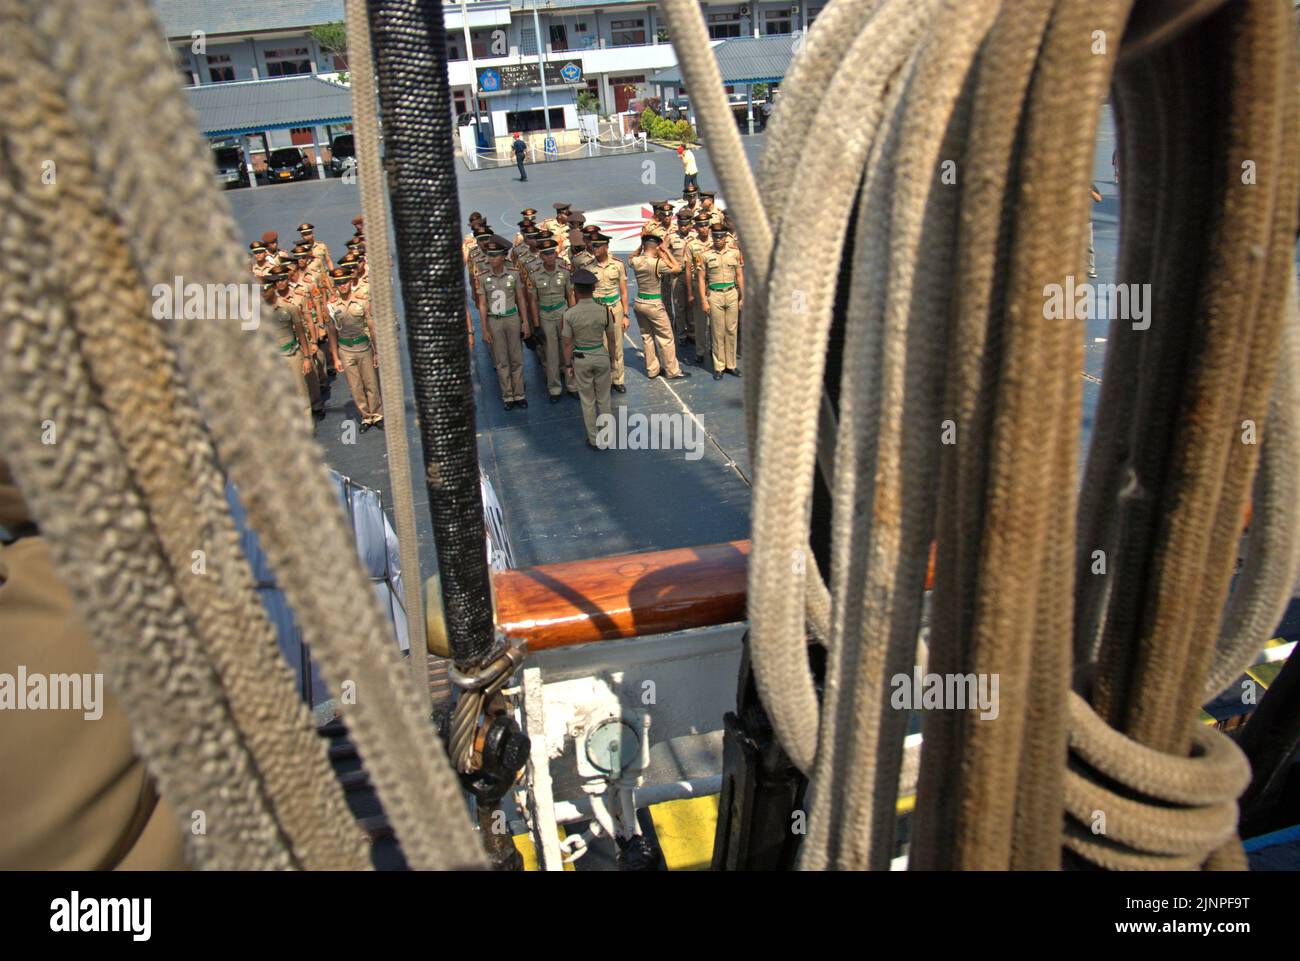 Indonesian navy cadets and officers getting ready for a briefing, seen from KRI Dewaruci (Dewa Ruci), an Indonesian tall ship, as the barquentine type schooner is opened for public visitors at Kolinlamil harbour (Navy harbour) in Tanjung Priok, North Jakarta, Jakarta, Indonesia. Stock Photo